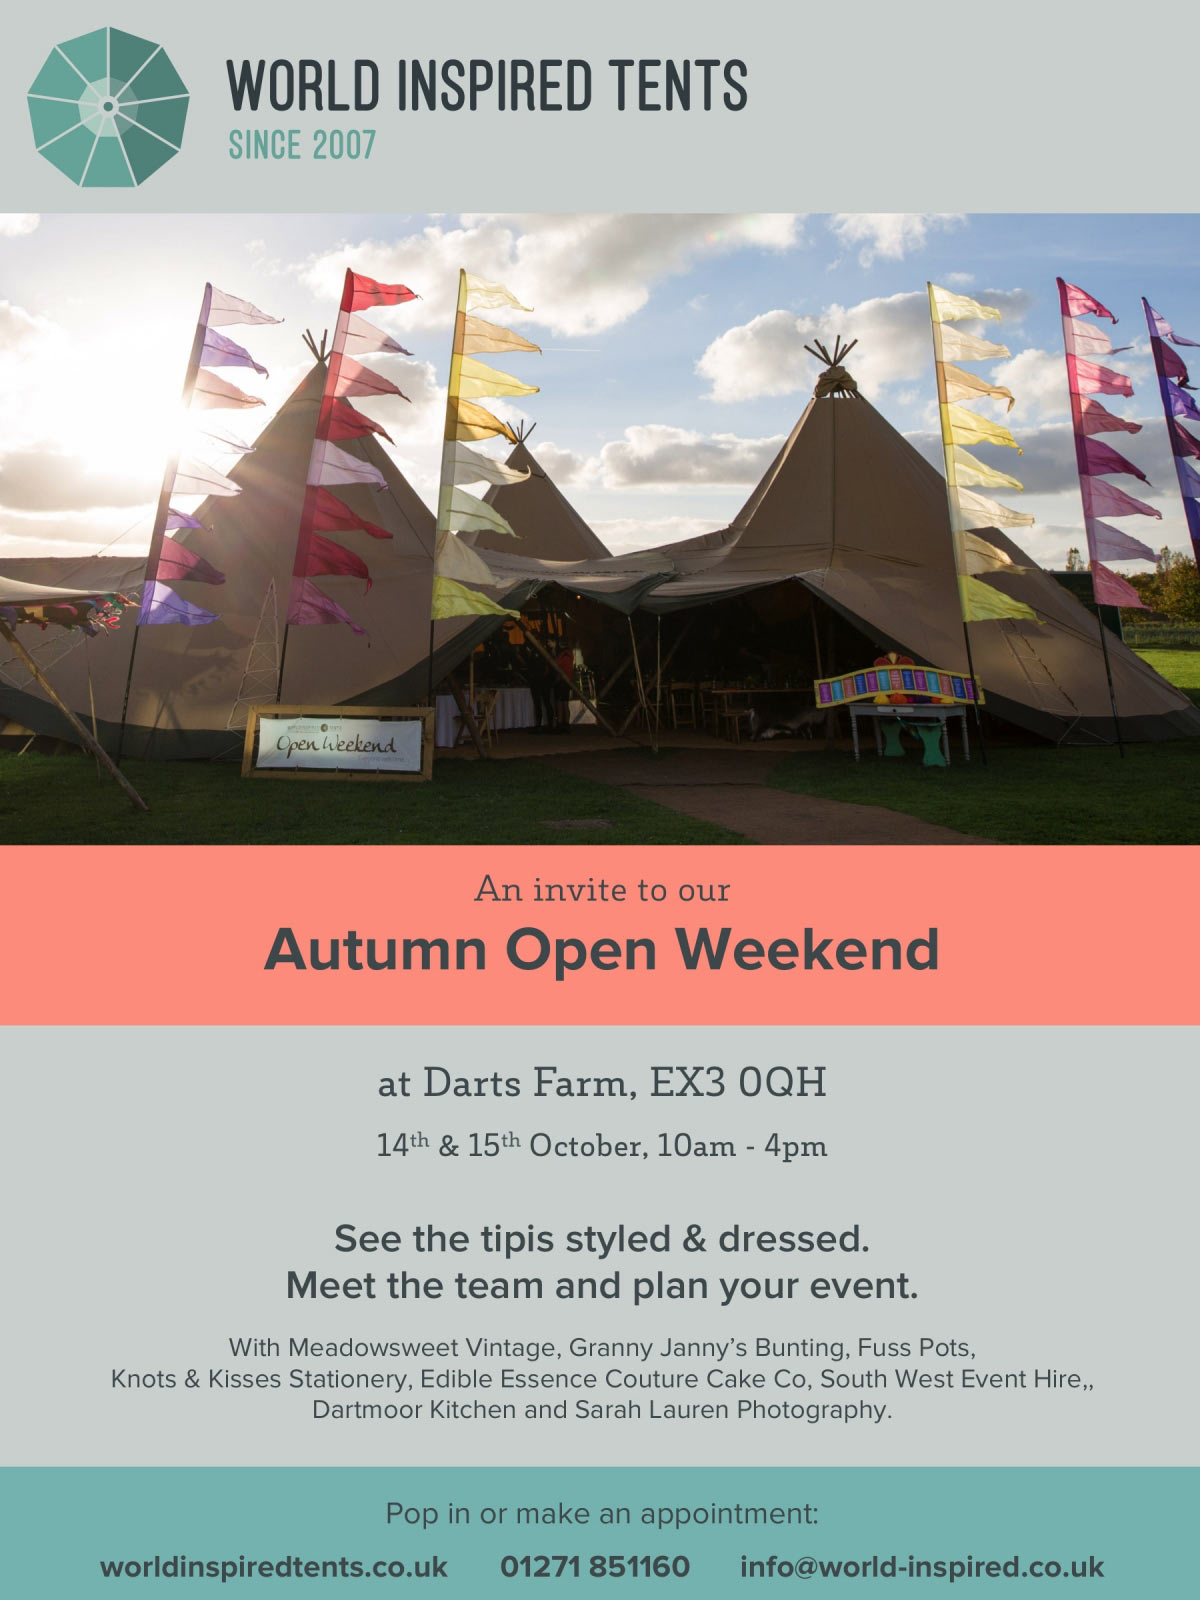 Autumn Open Weekend with World Inspired Tents